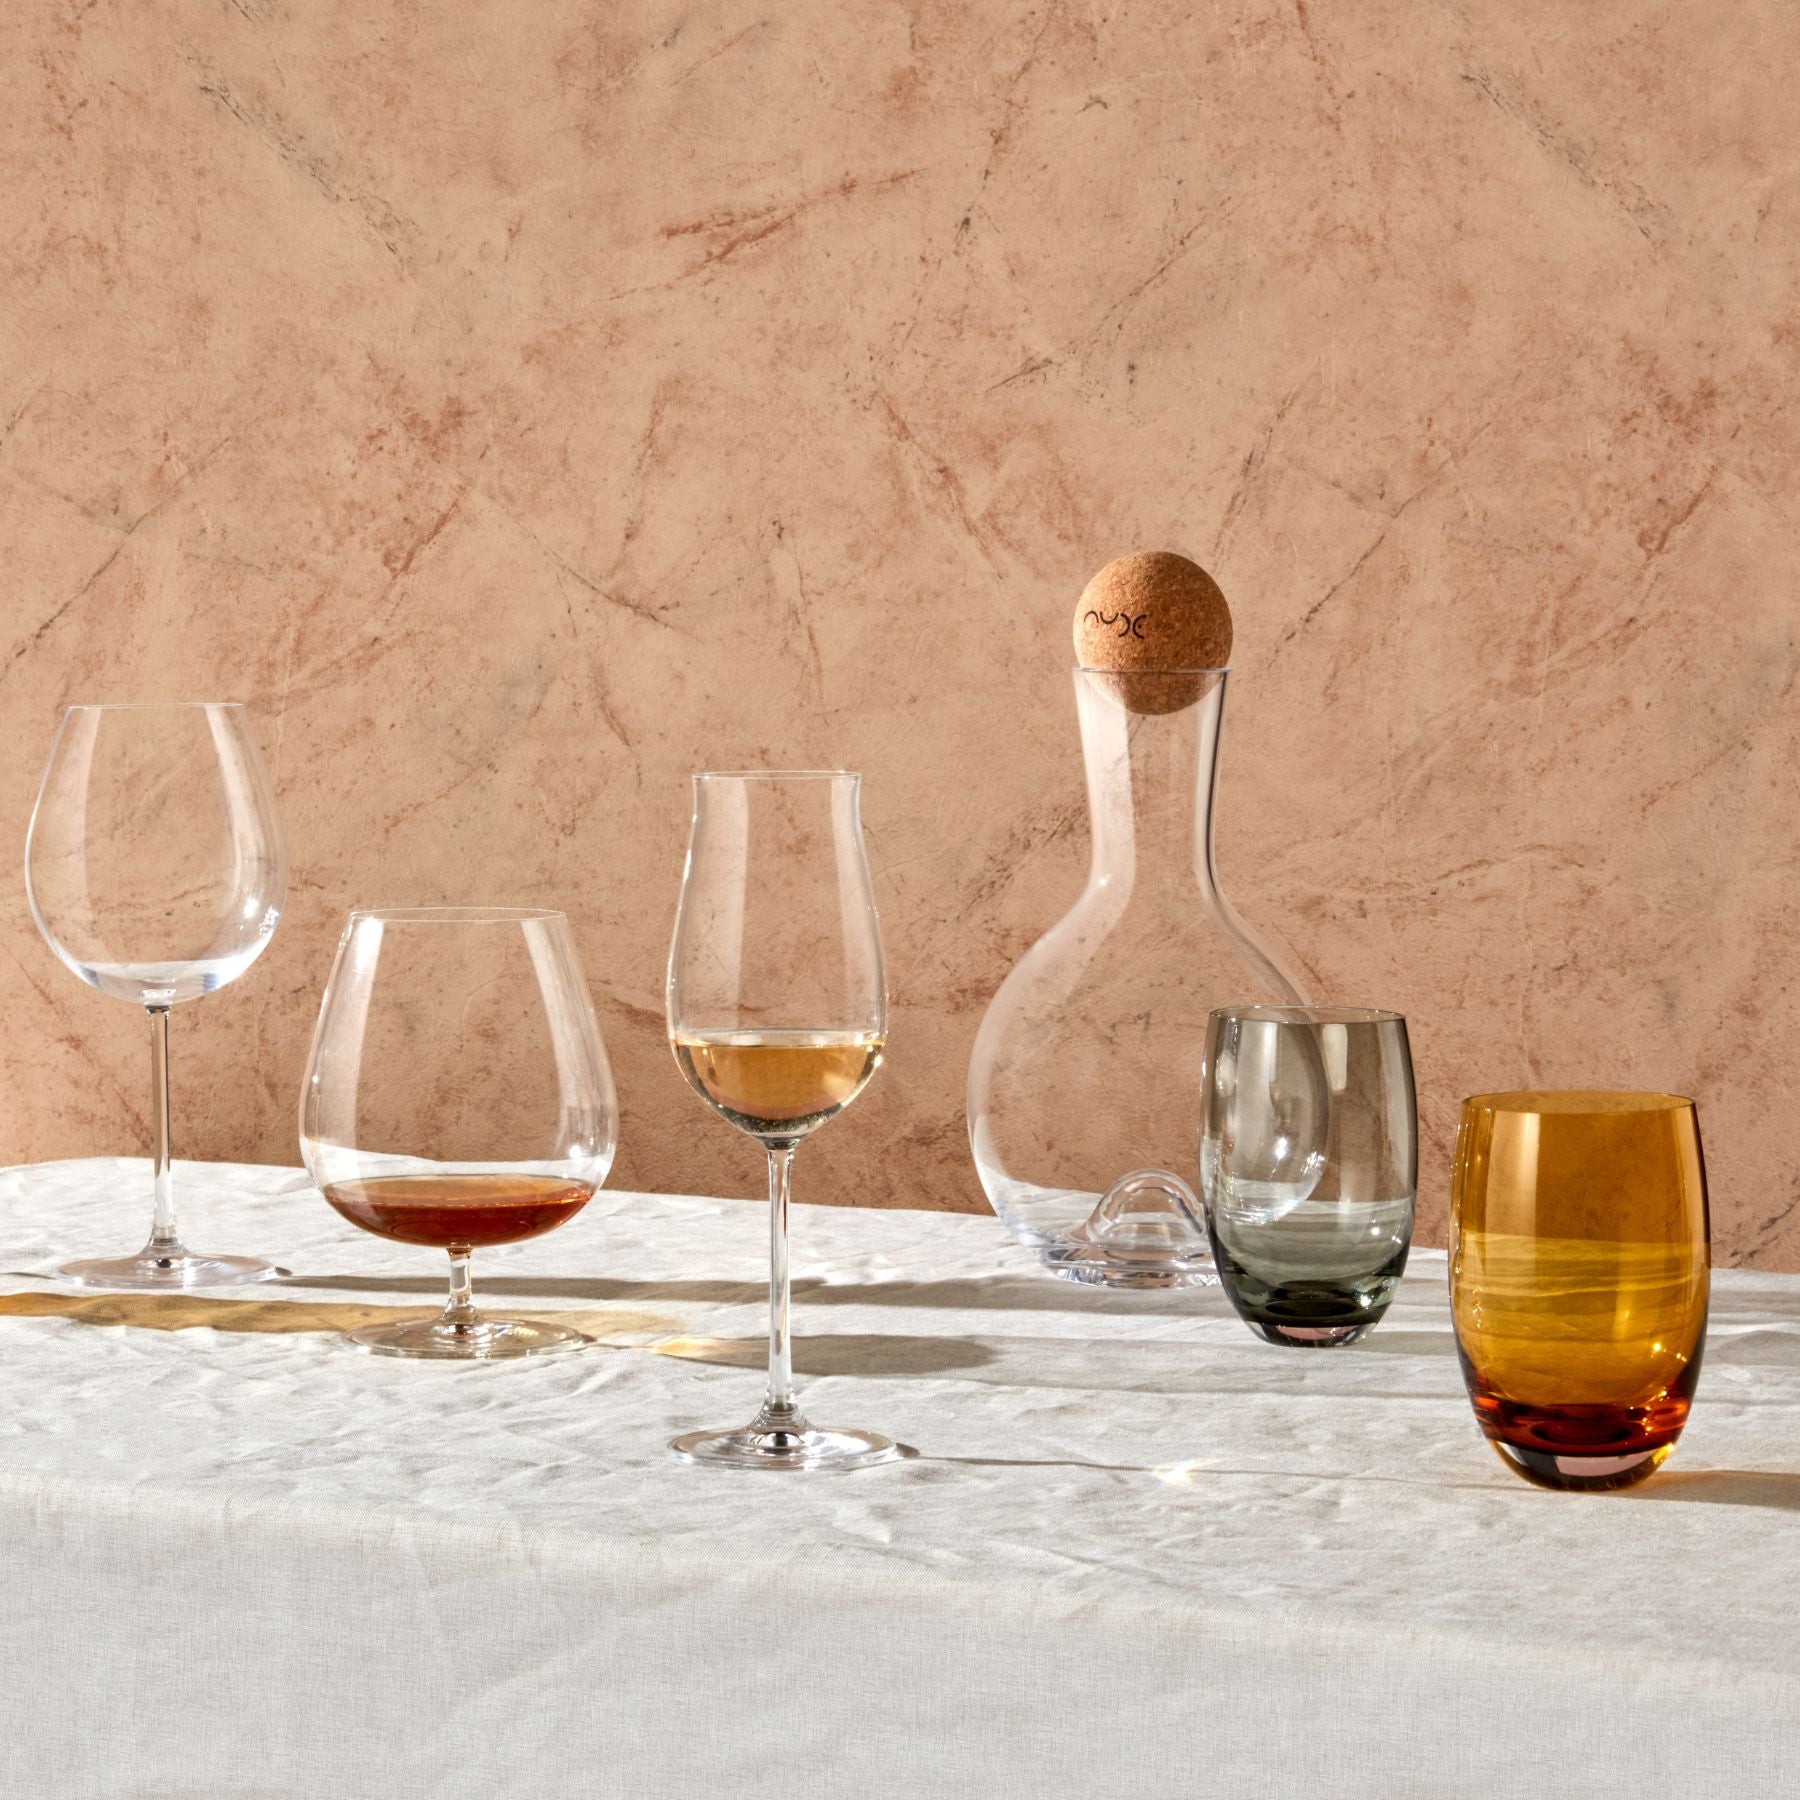 Elle Decor Set of 6 Wine Glasses Amber Colored Glassware Set Colored Wine Glasses Vintage Glassware Sets, Water Goblets for Party, Wedding, & Daily